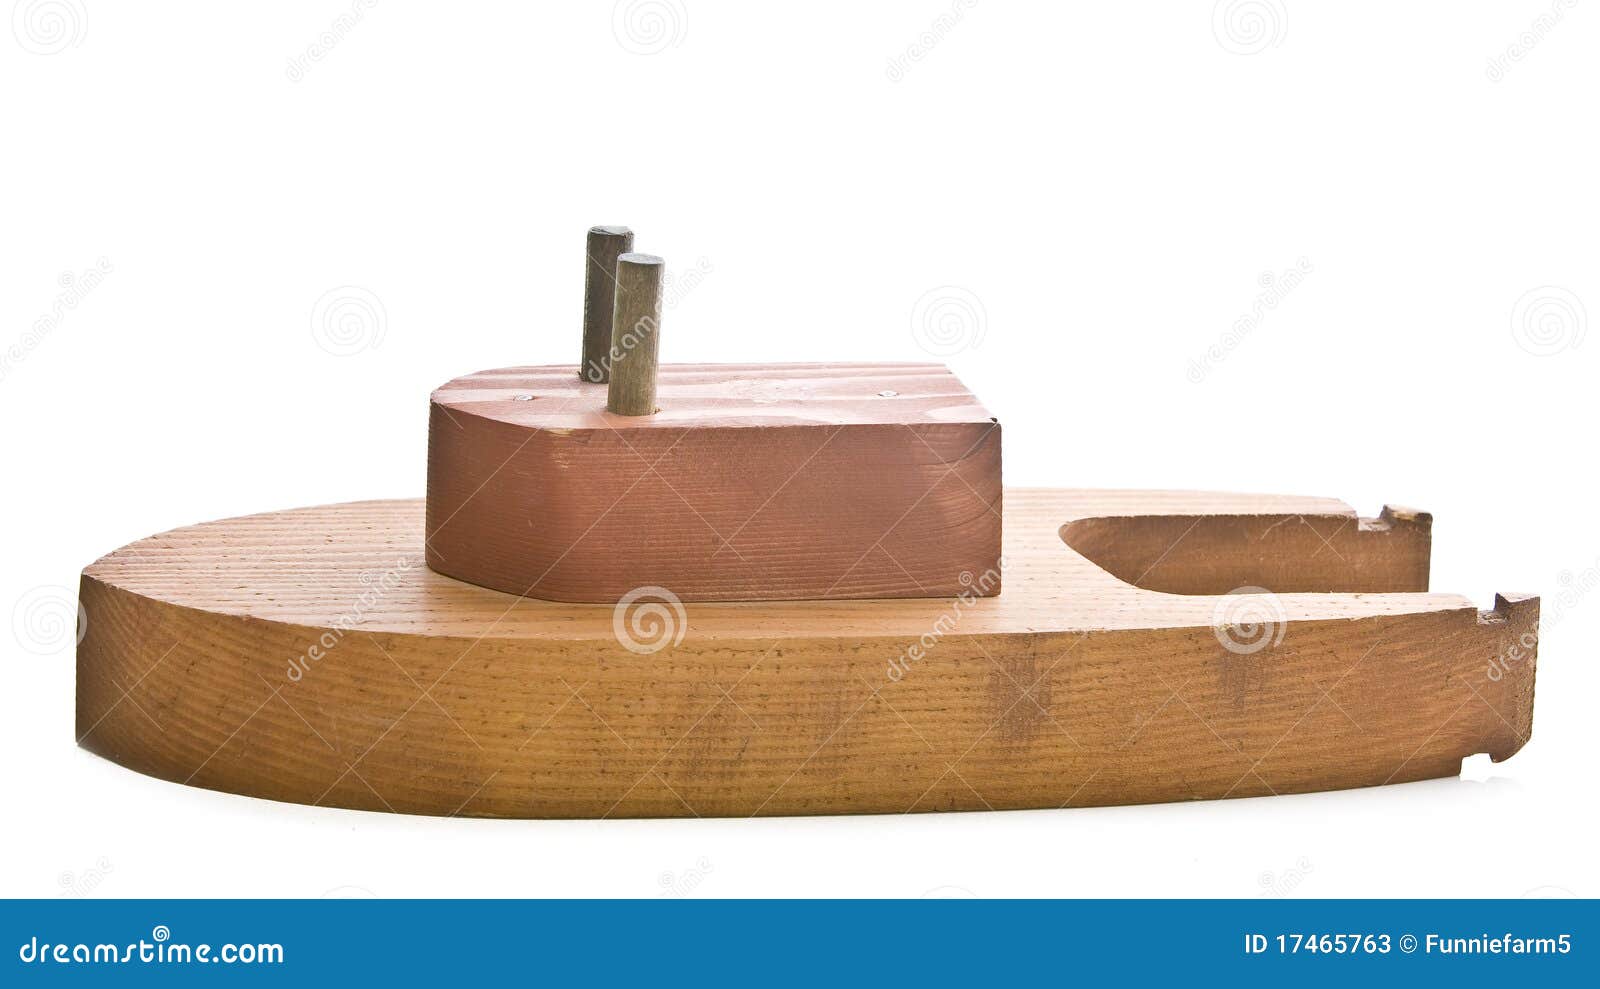 Wooden Toy Tug Boat Plans